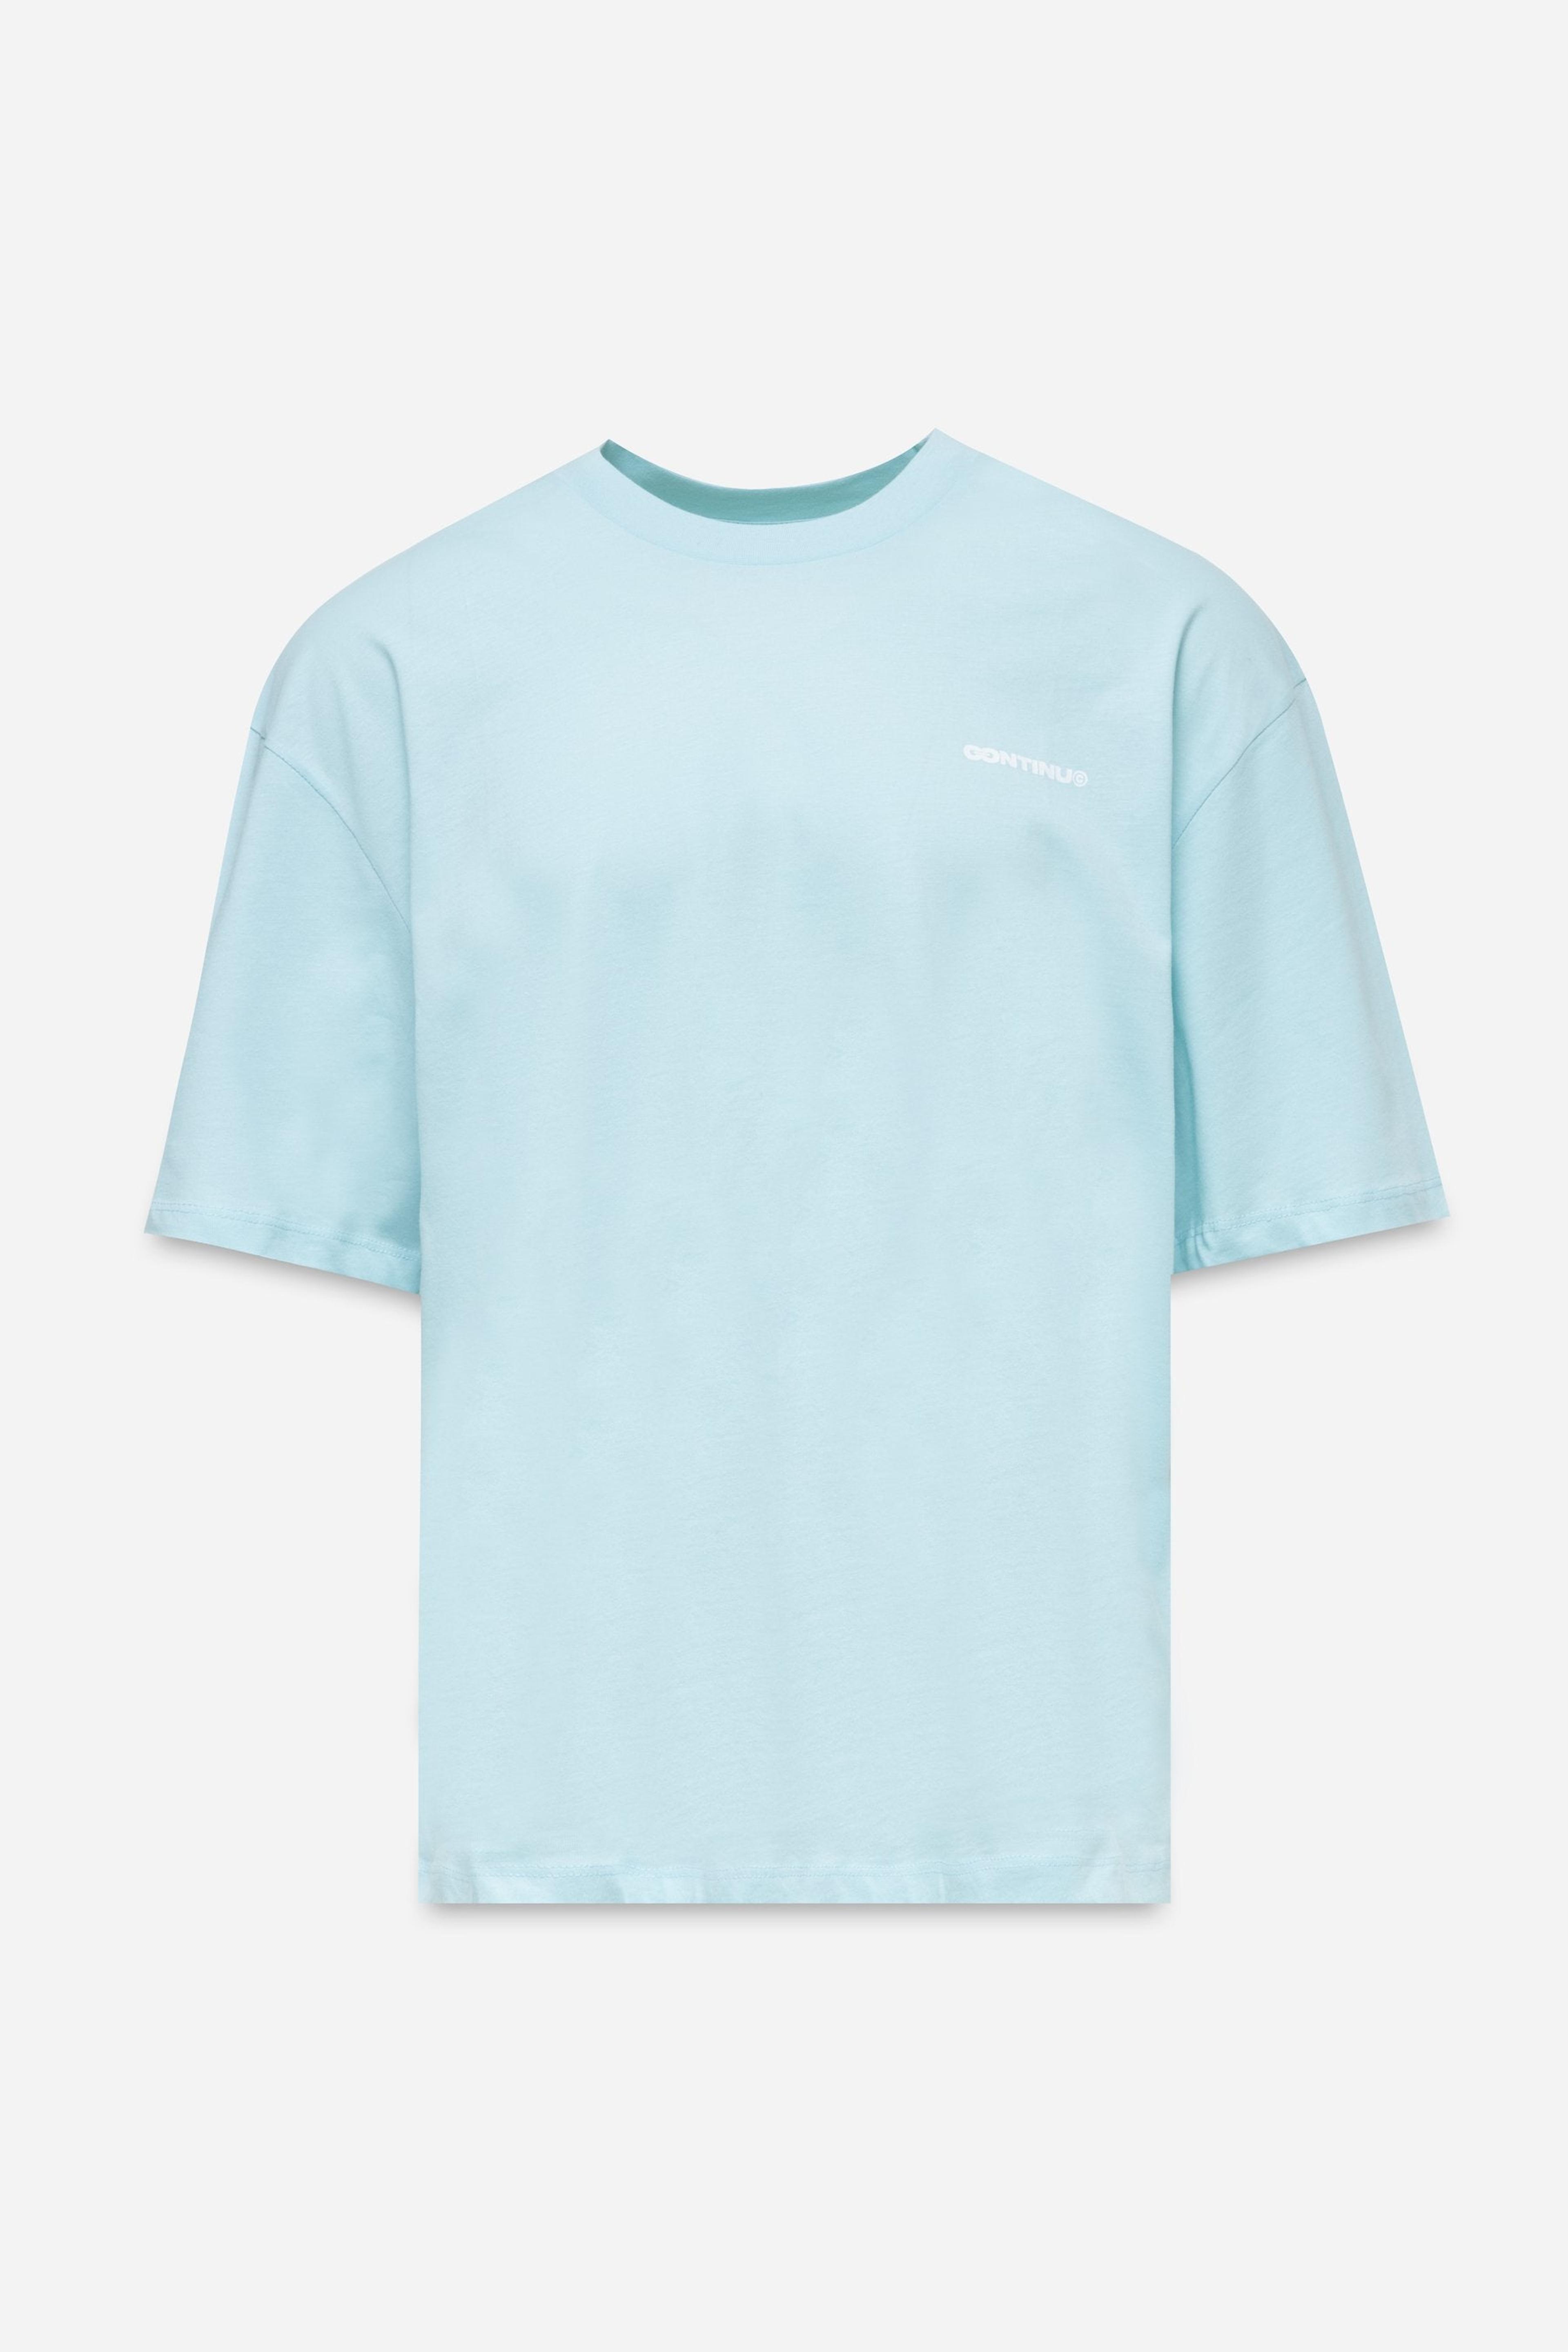 Alternate View 8 of CONTINU8 PALE BLUE OVERSIZED T-SHIRT